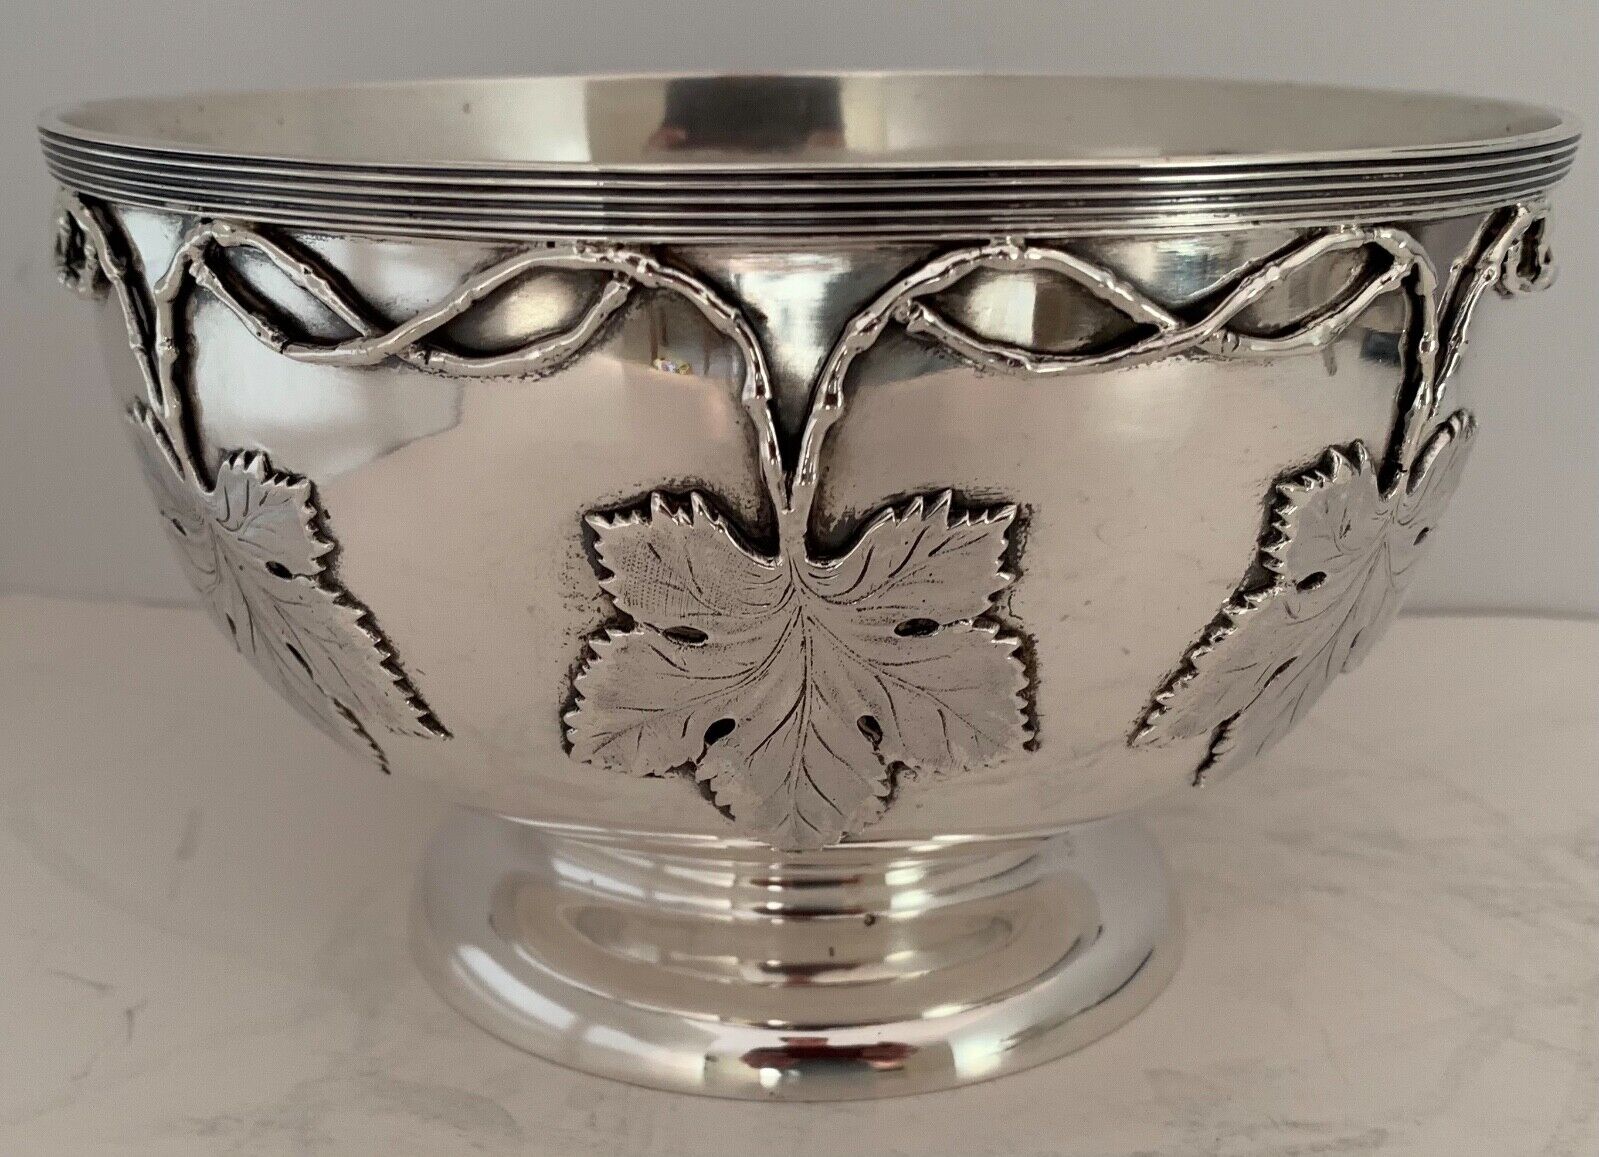 GORGOUS ENGLISH STERLING shop FRUIT BOWL WITH APPLIED G& New color LEAVES VINES